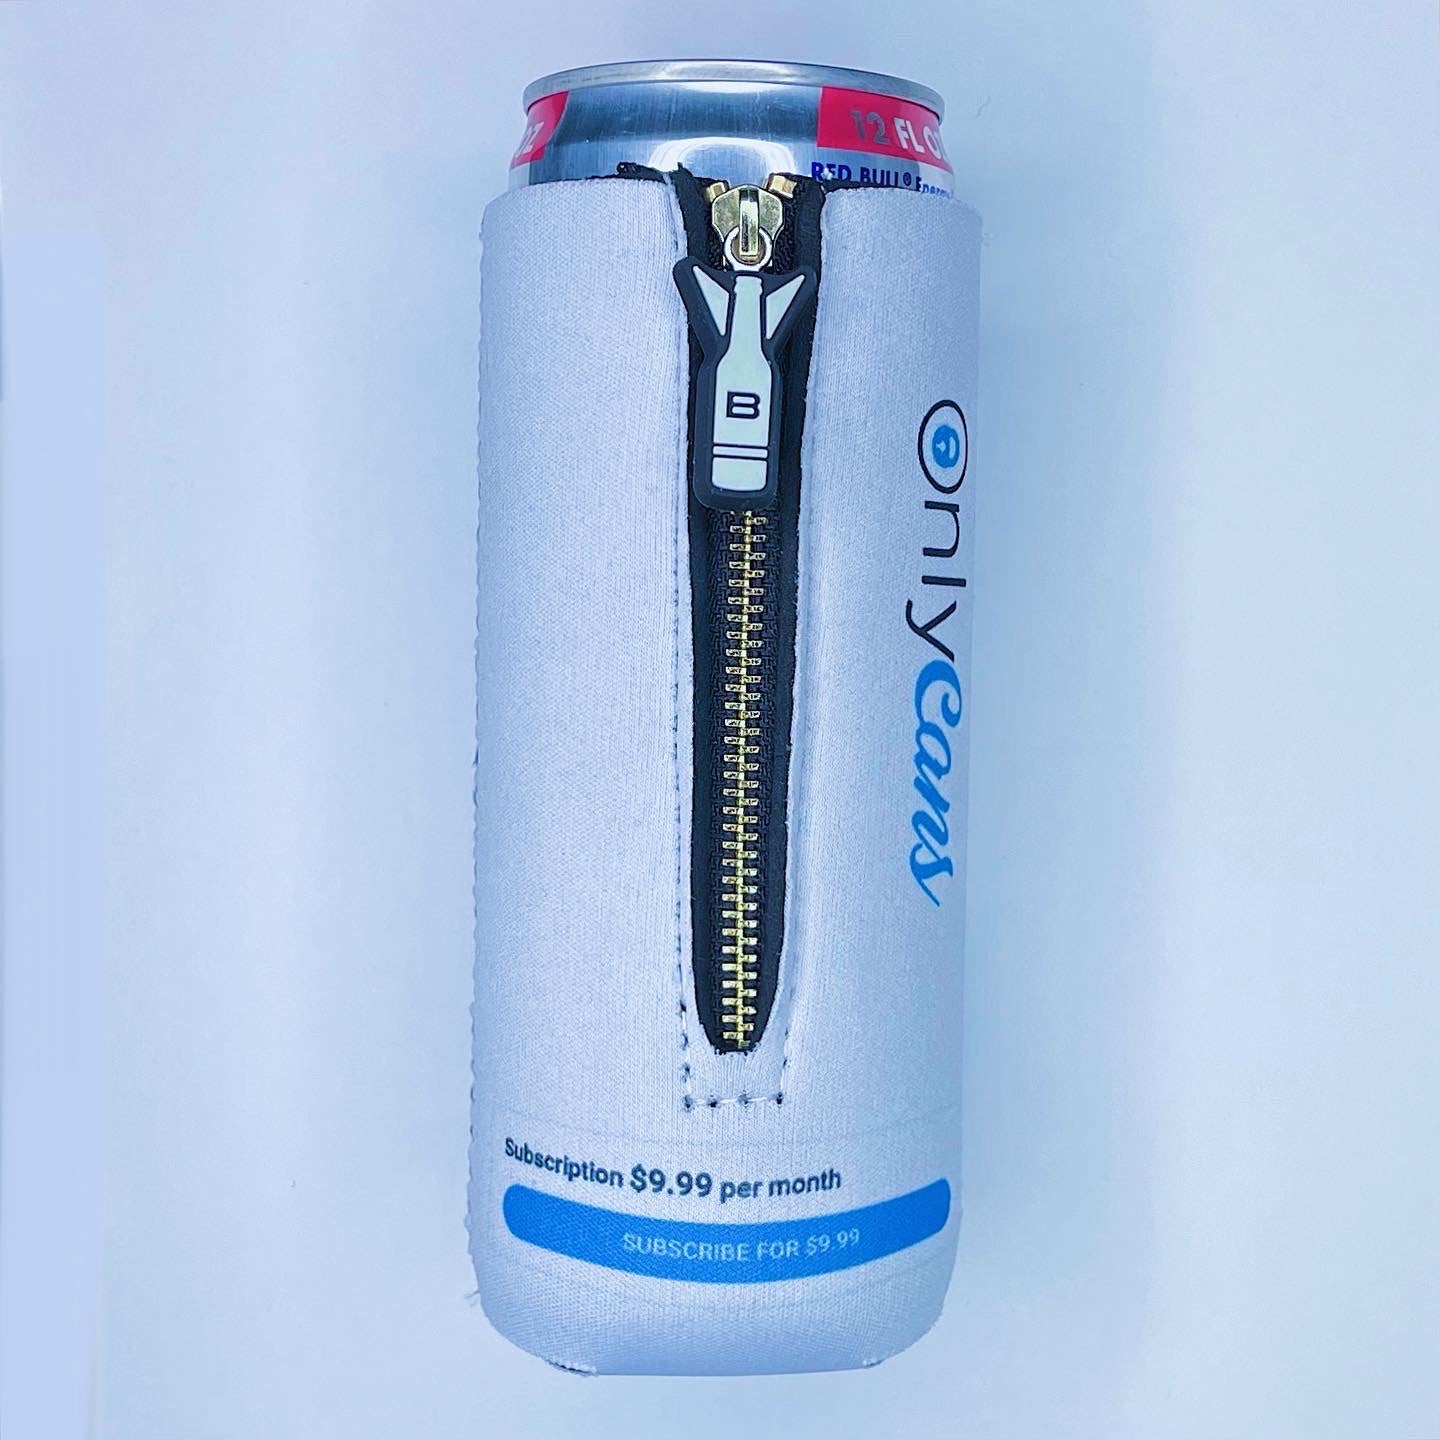 C-12 OnlyCans 12 oz tall slim can insulator